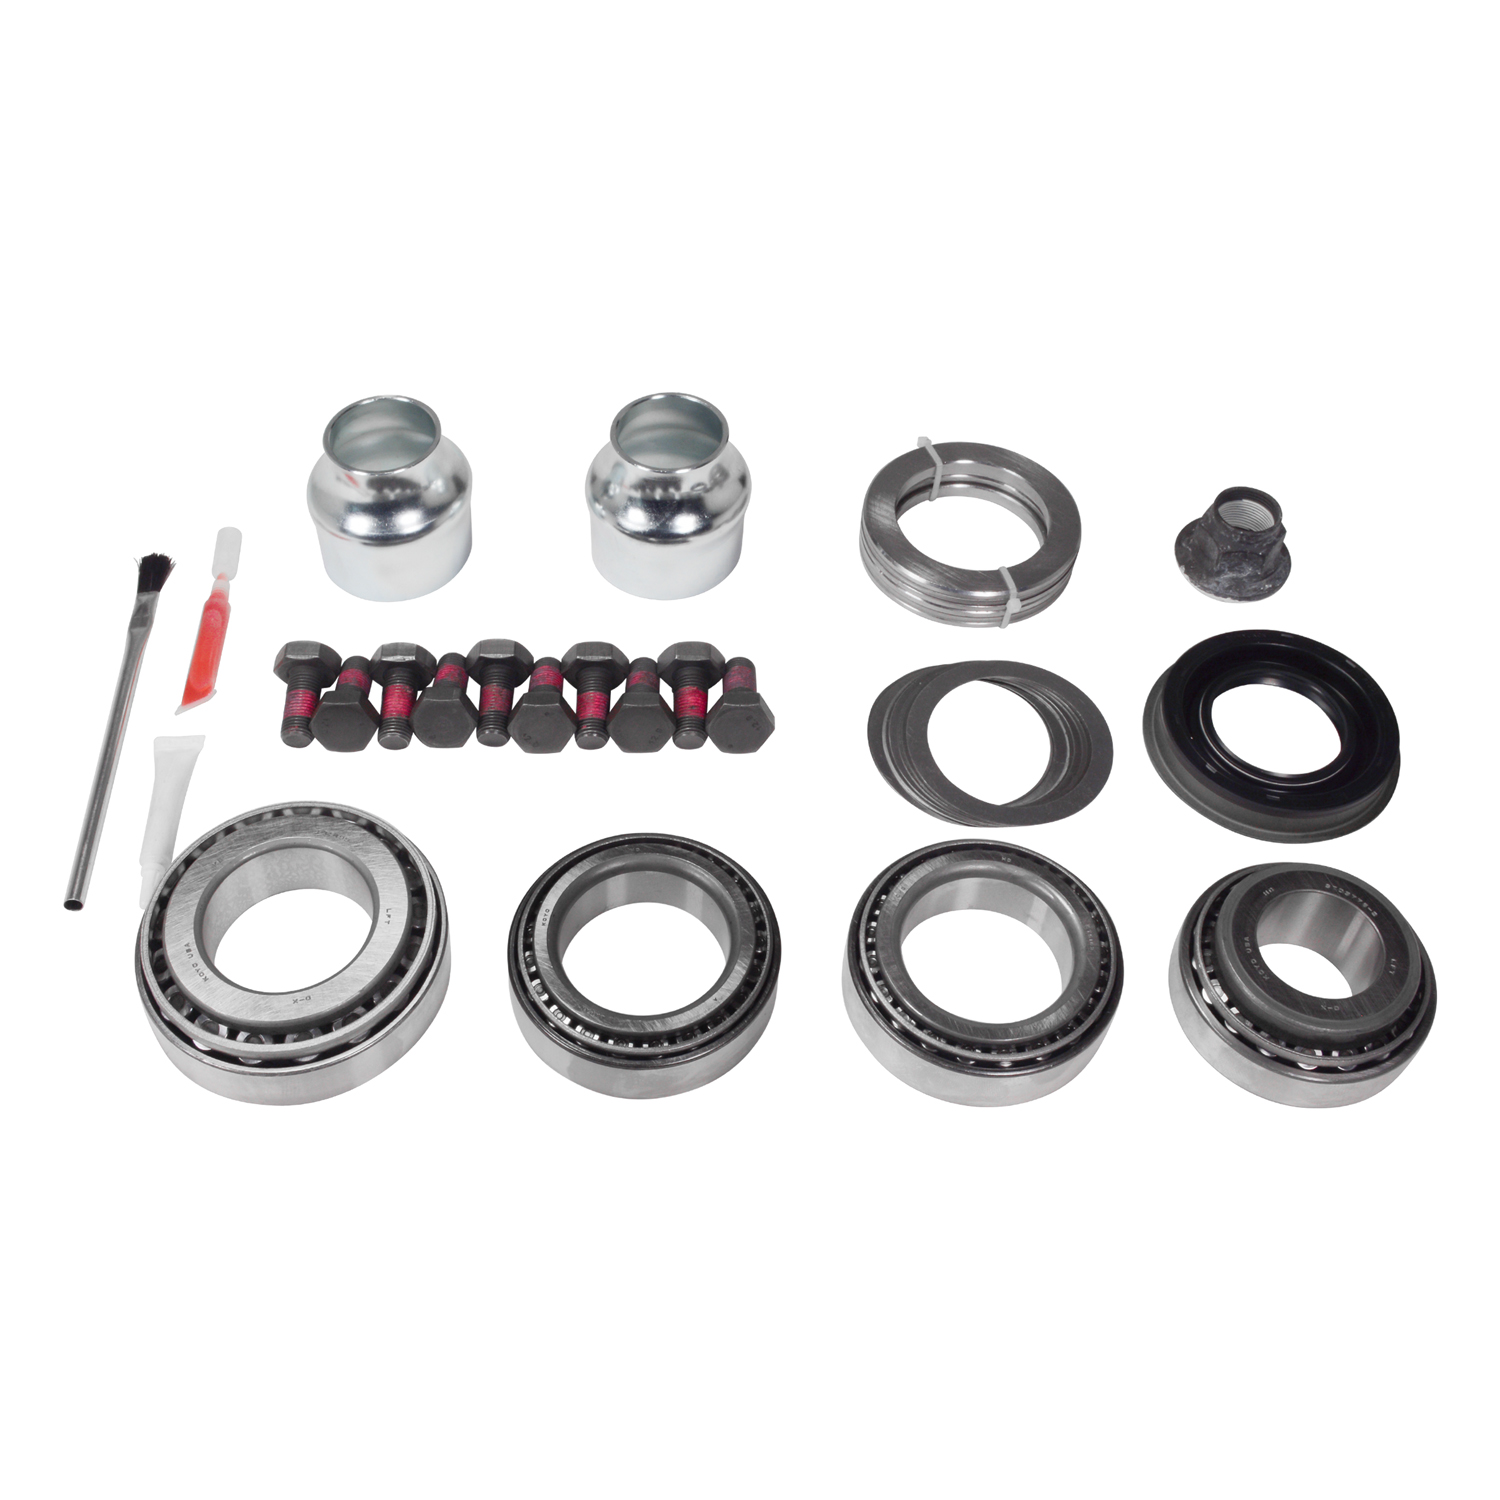 USA Standard Master Overhaul Kit for 2015 & up Mustang and F-150